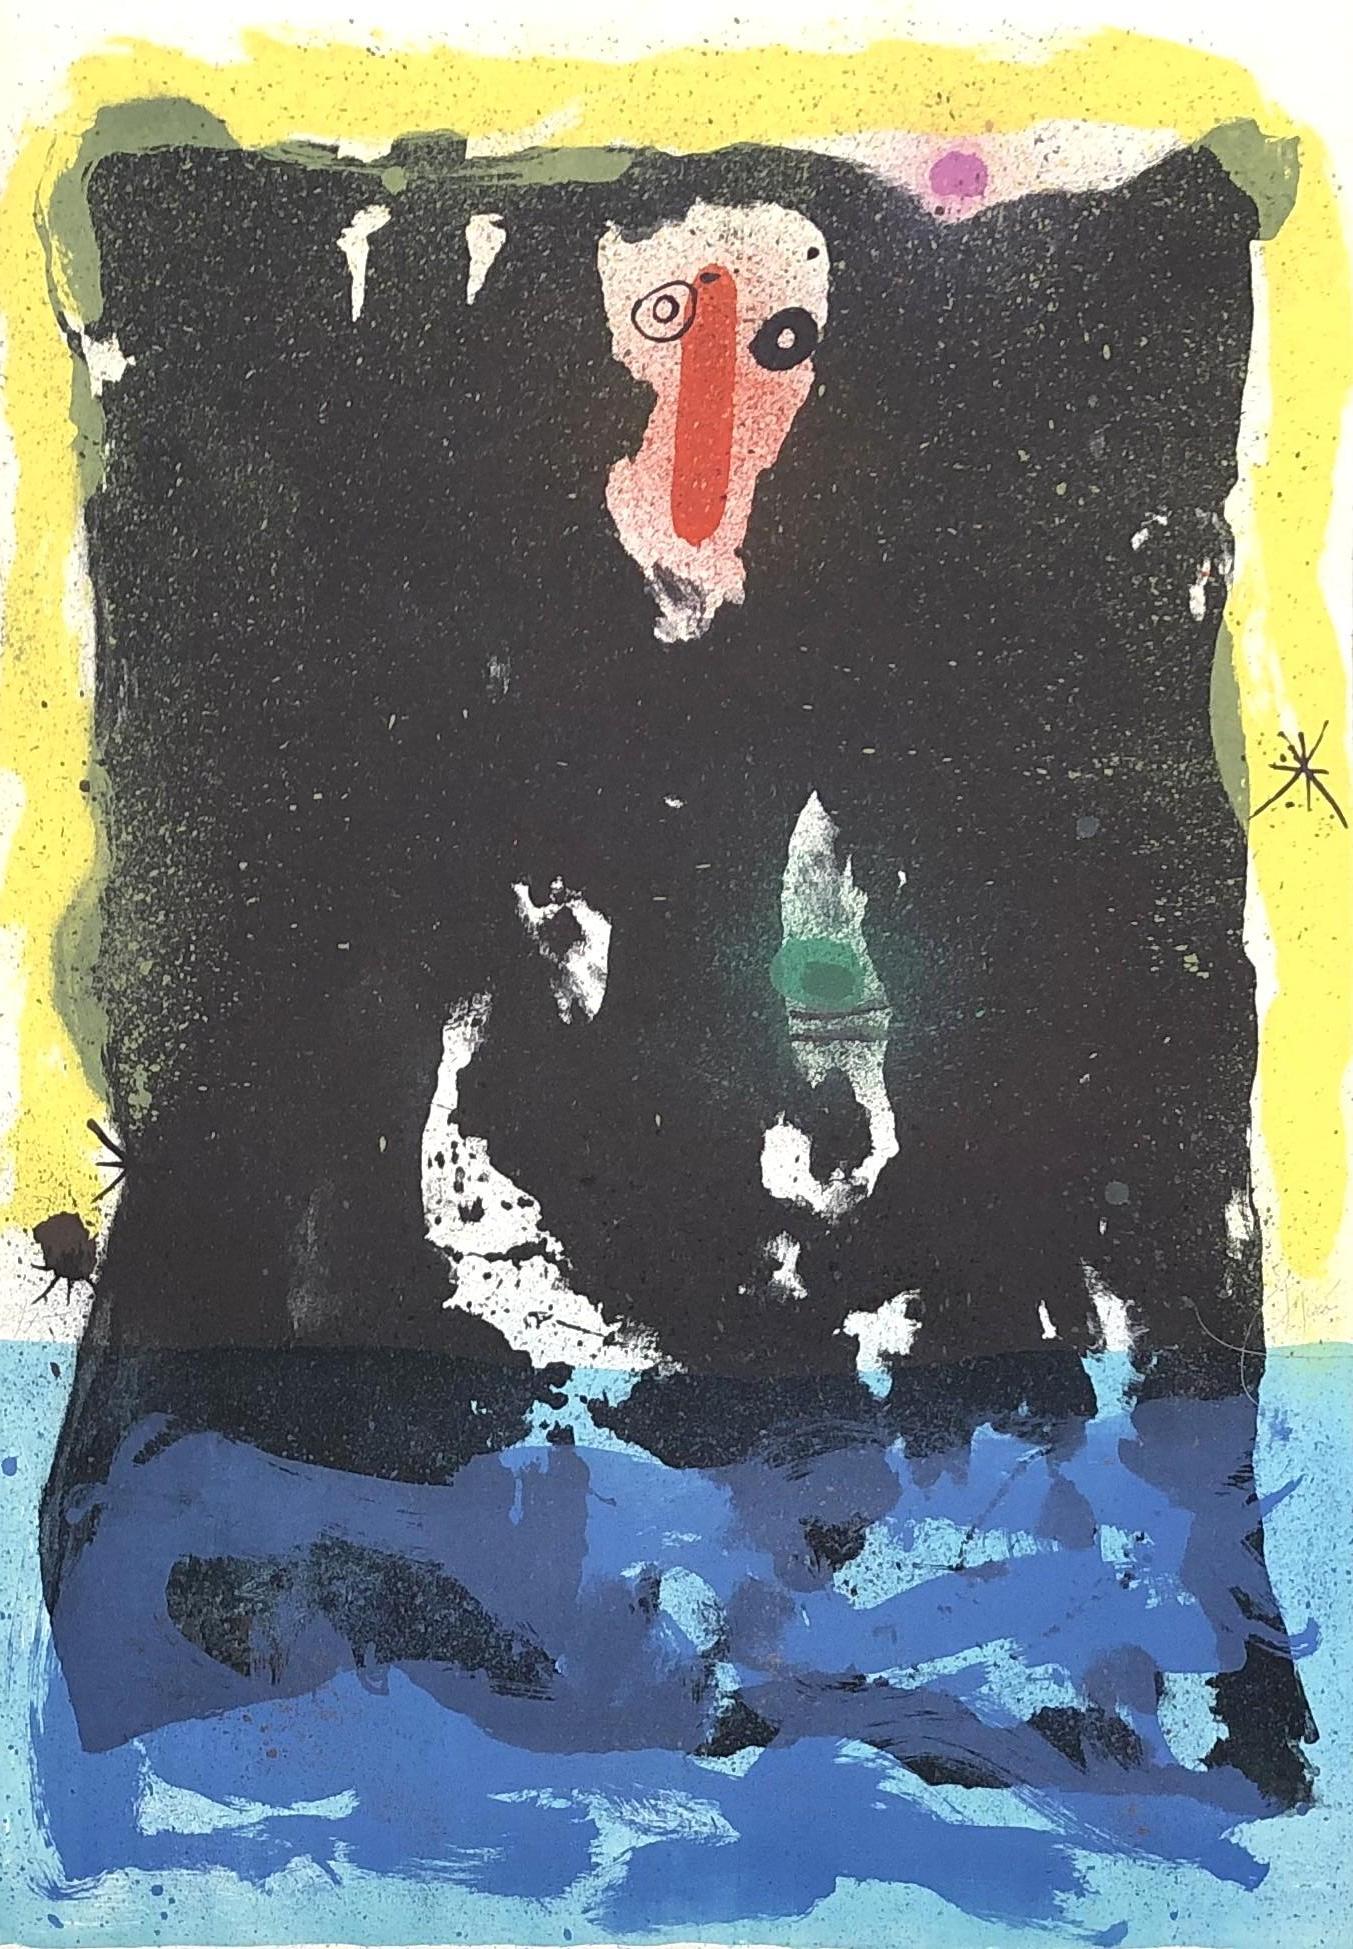 Joan Miró Abstract Print - Le Revenant - Original Lithograph Handsigned and Numbered 